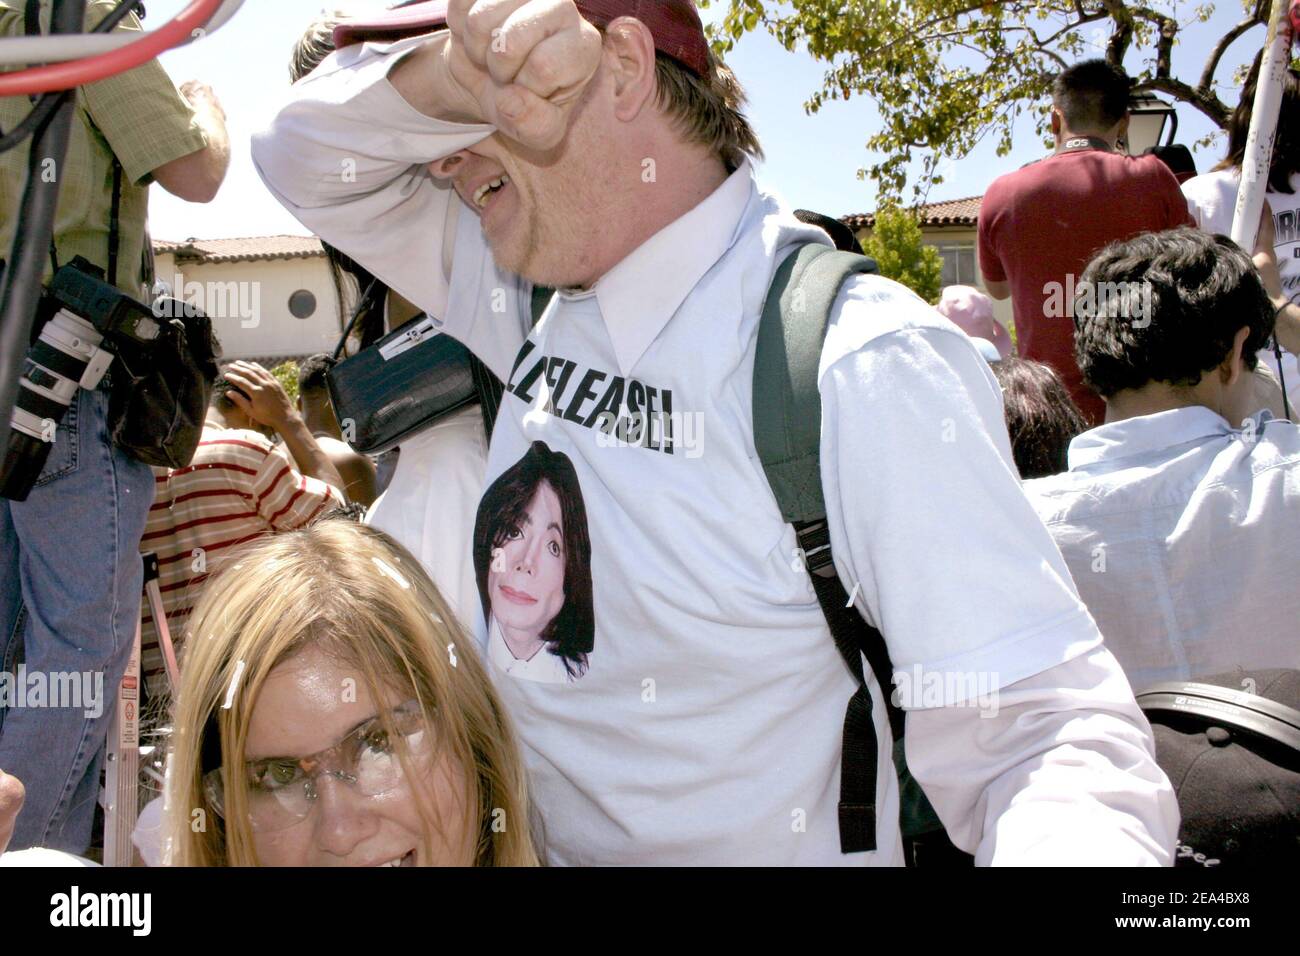 A fan of Michael Jackson cries openly as the final innocent verdict is read outside the Santa Maria, CA Courthouse on June 13, 2005. Photo By Mark Velasquez/ABACA Stock Photo